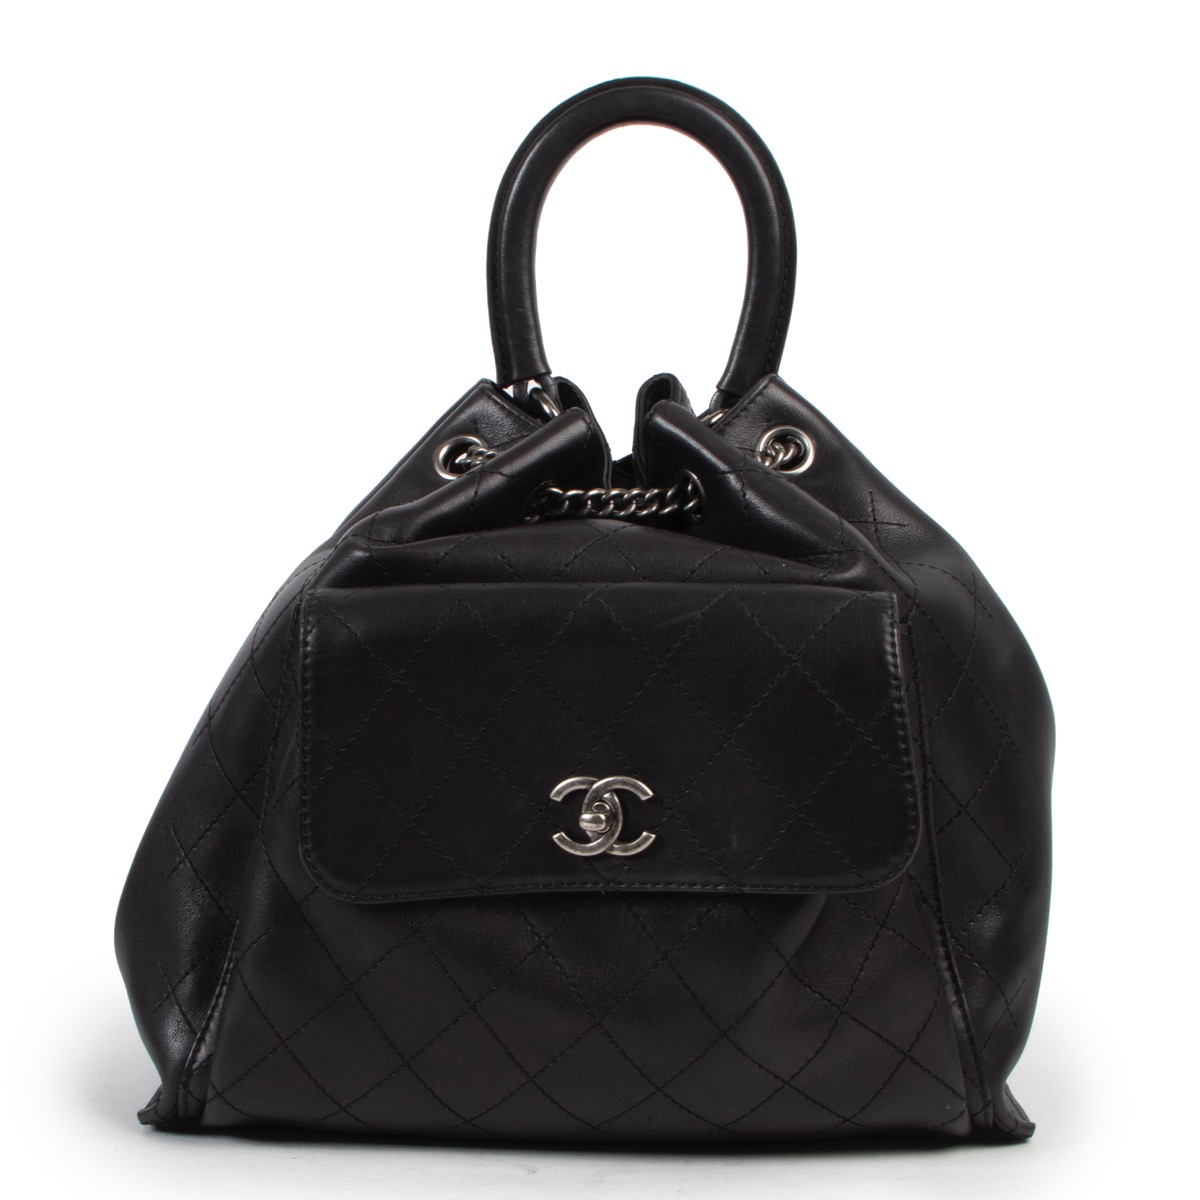 chanel patent leather backpack